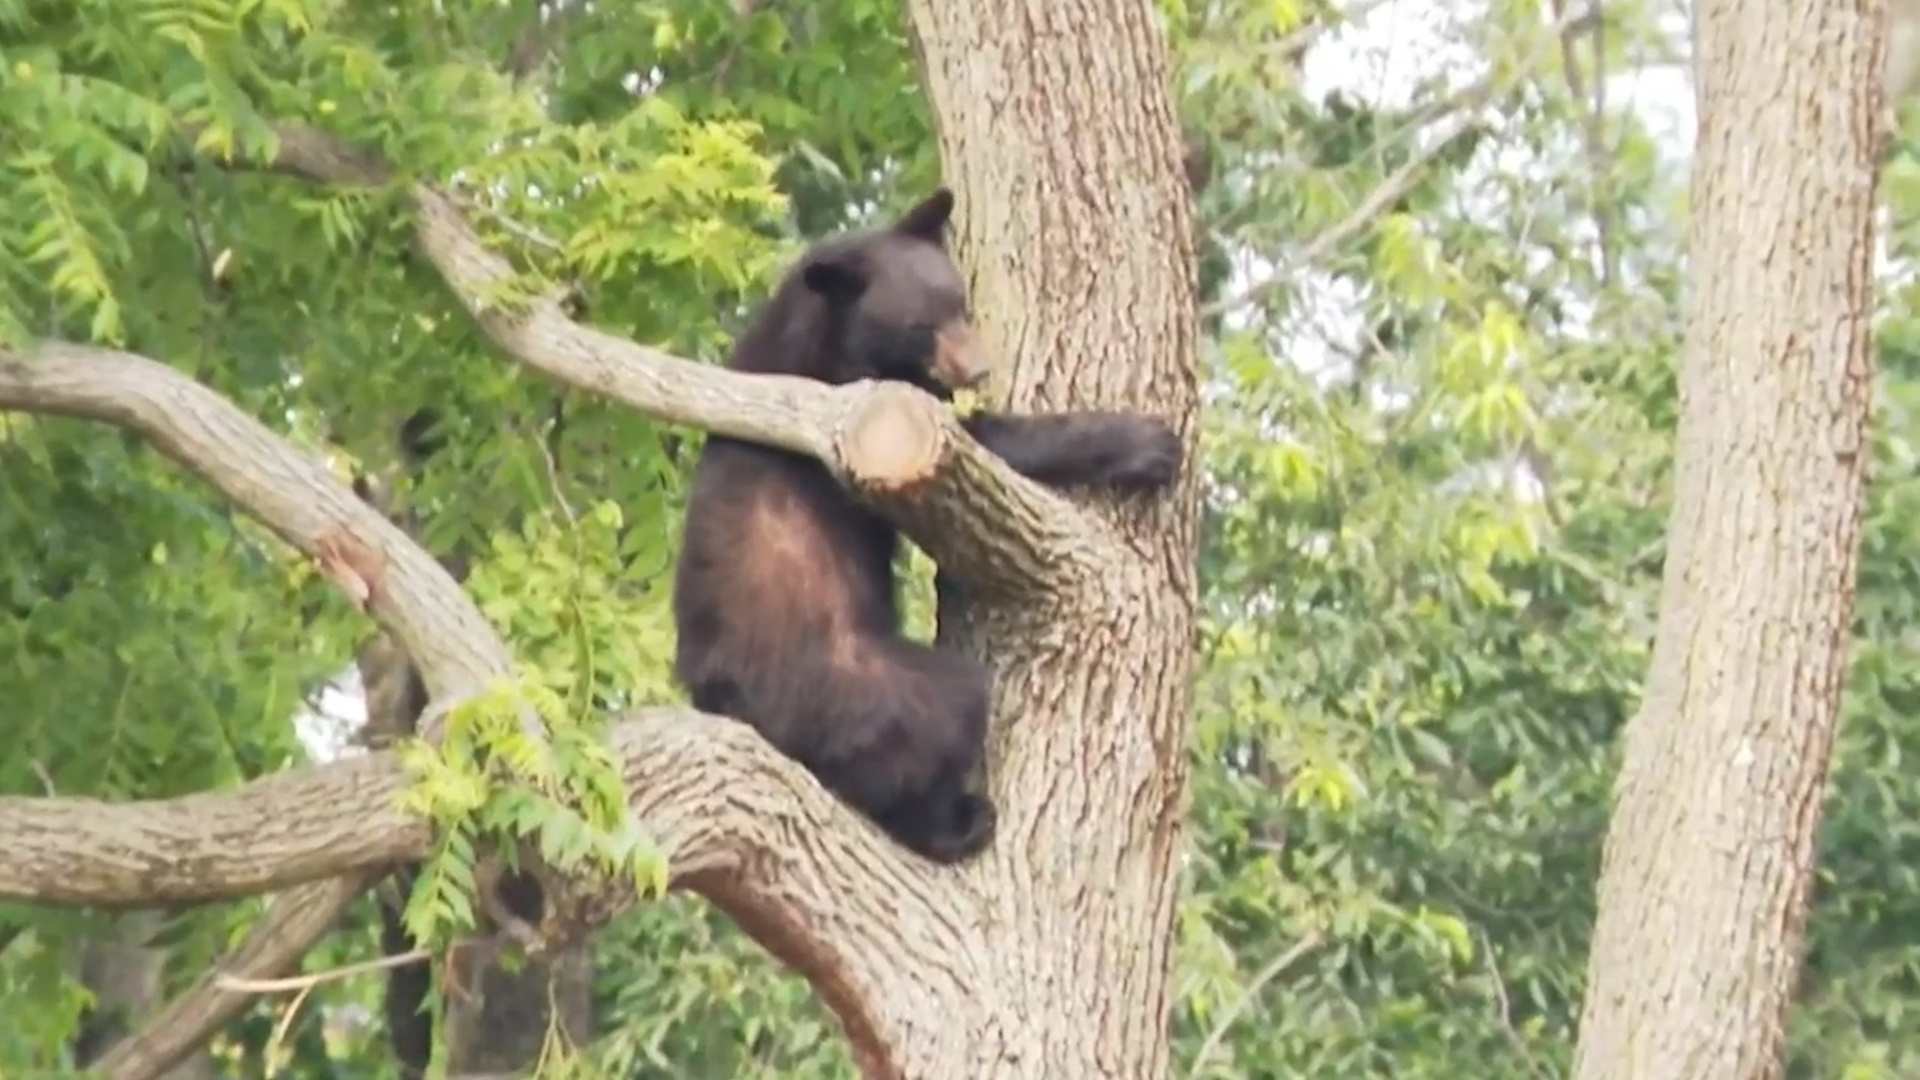 Learning to sleep like a bear could save your life - The Washington Post